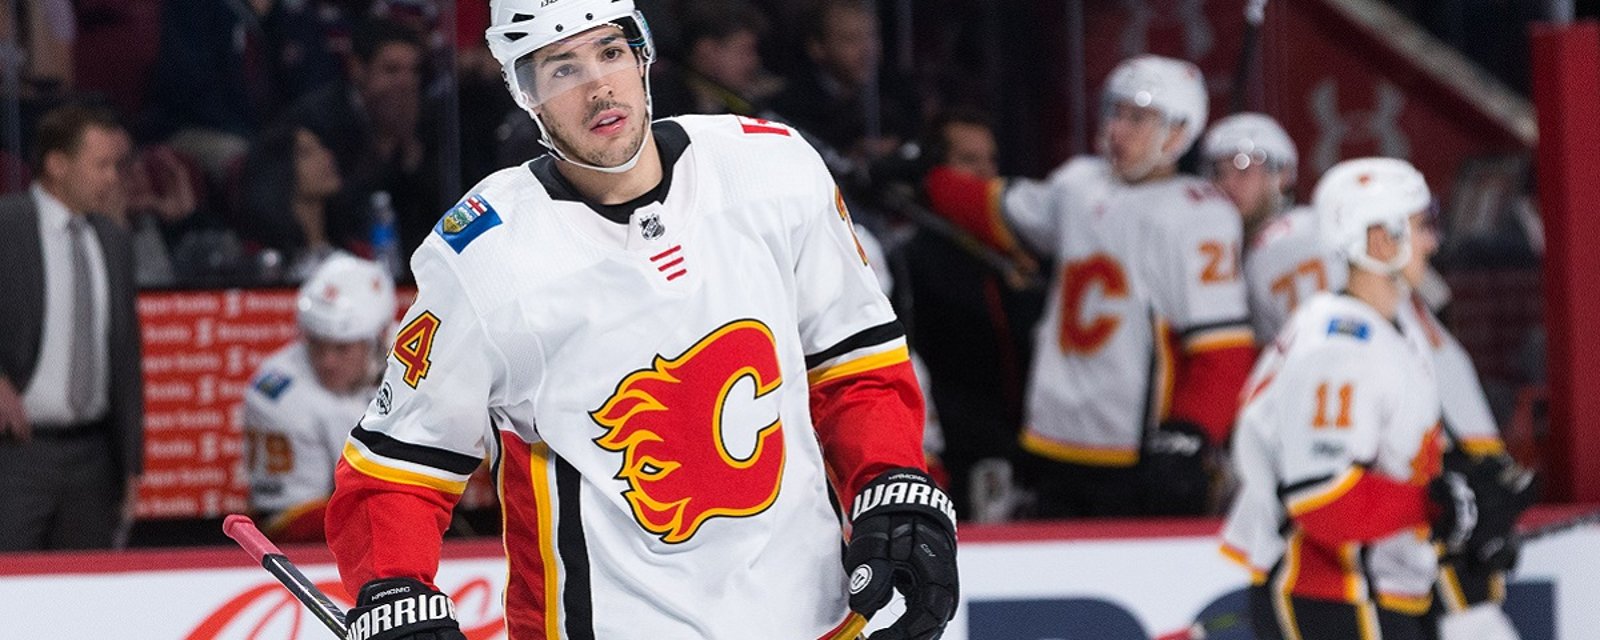 Report: Flames reveal the sad reason behind Hamonic's absence.